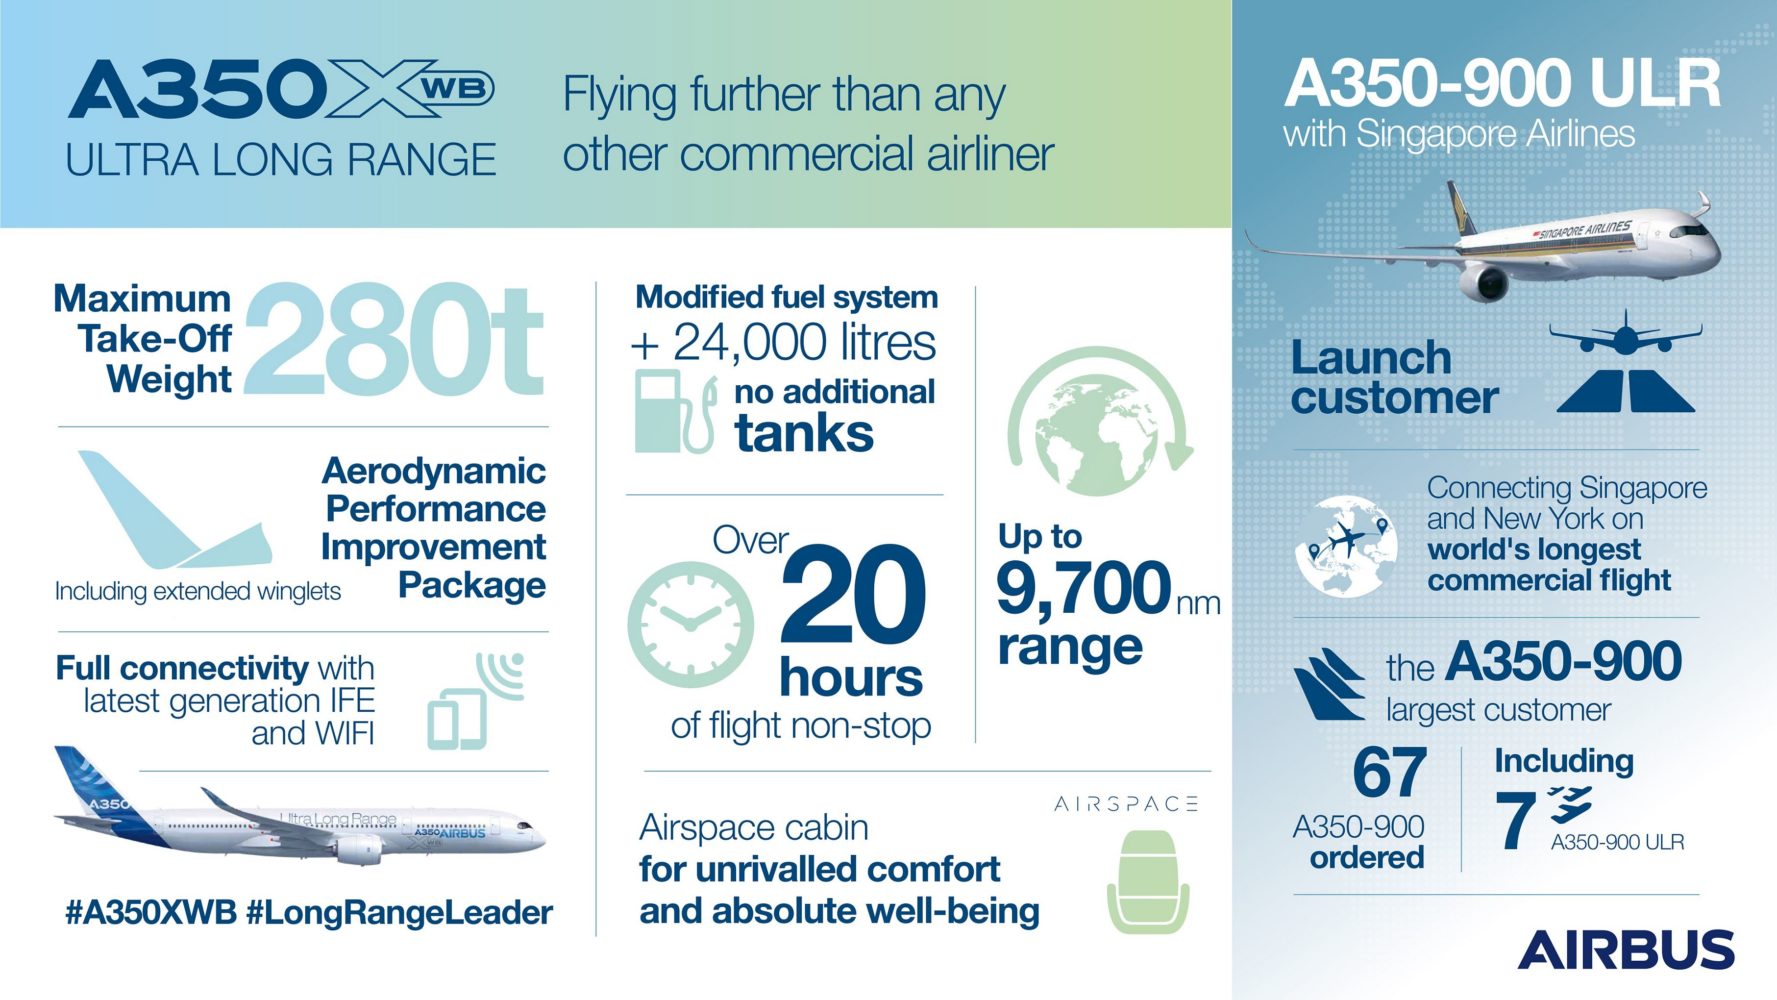 Airbus hands over worlds first A350-900ULR to Singapore Airlines